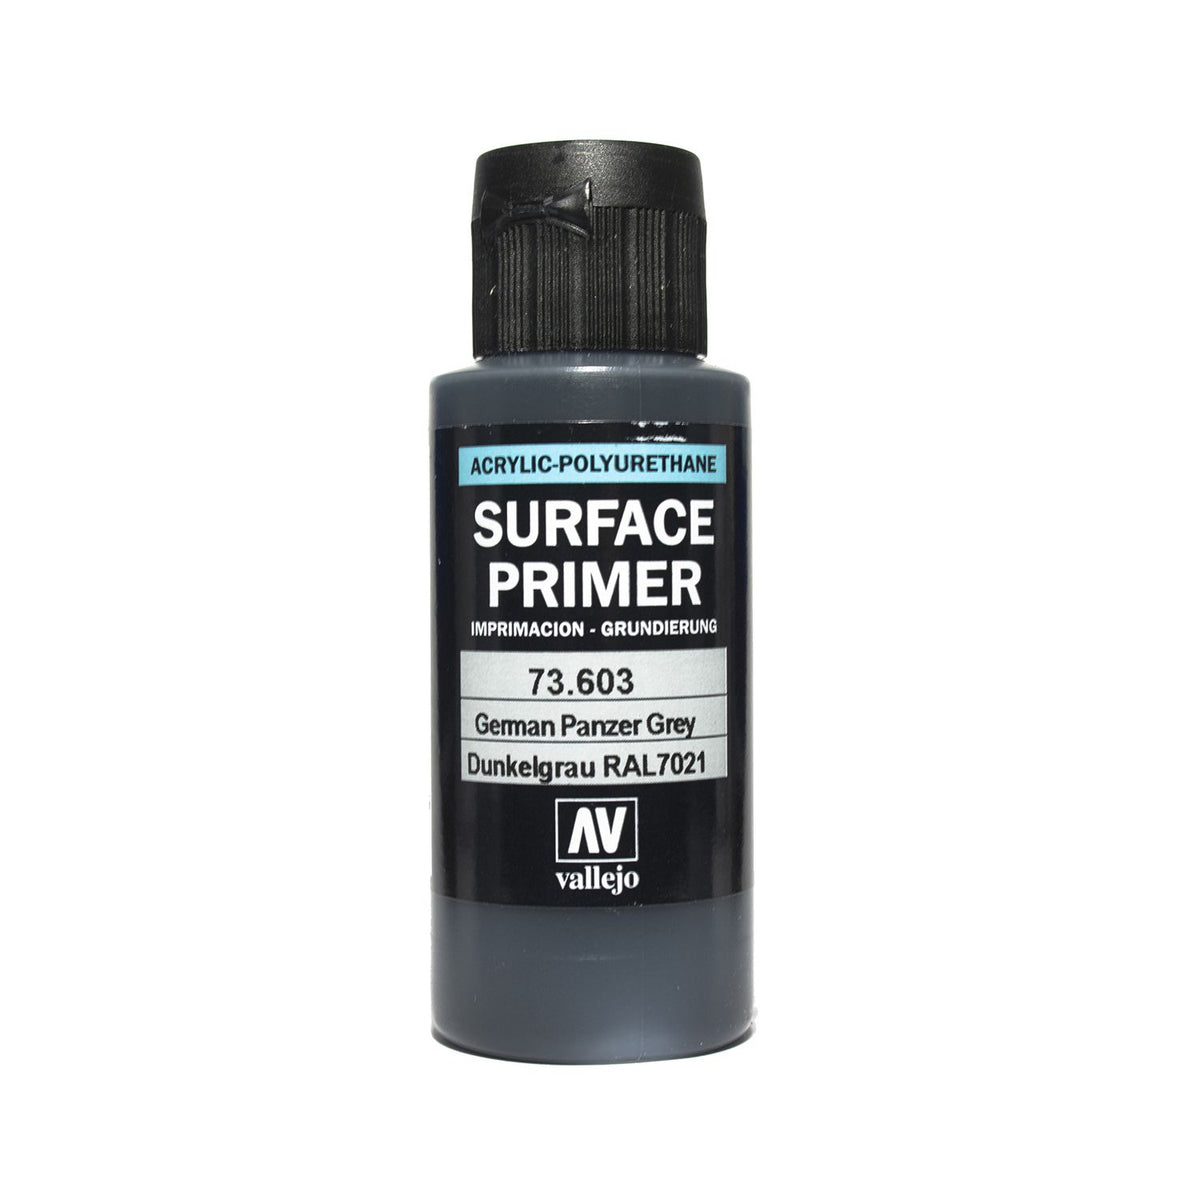 Vallejo Surface Primer 60ml Acrylic Paint - Ger Panzer Grey